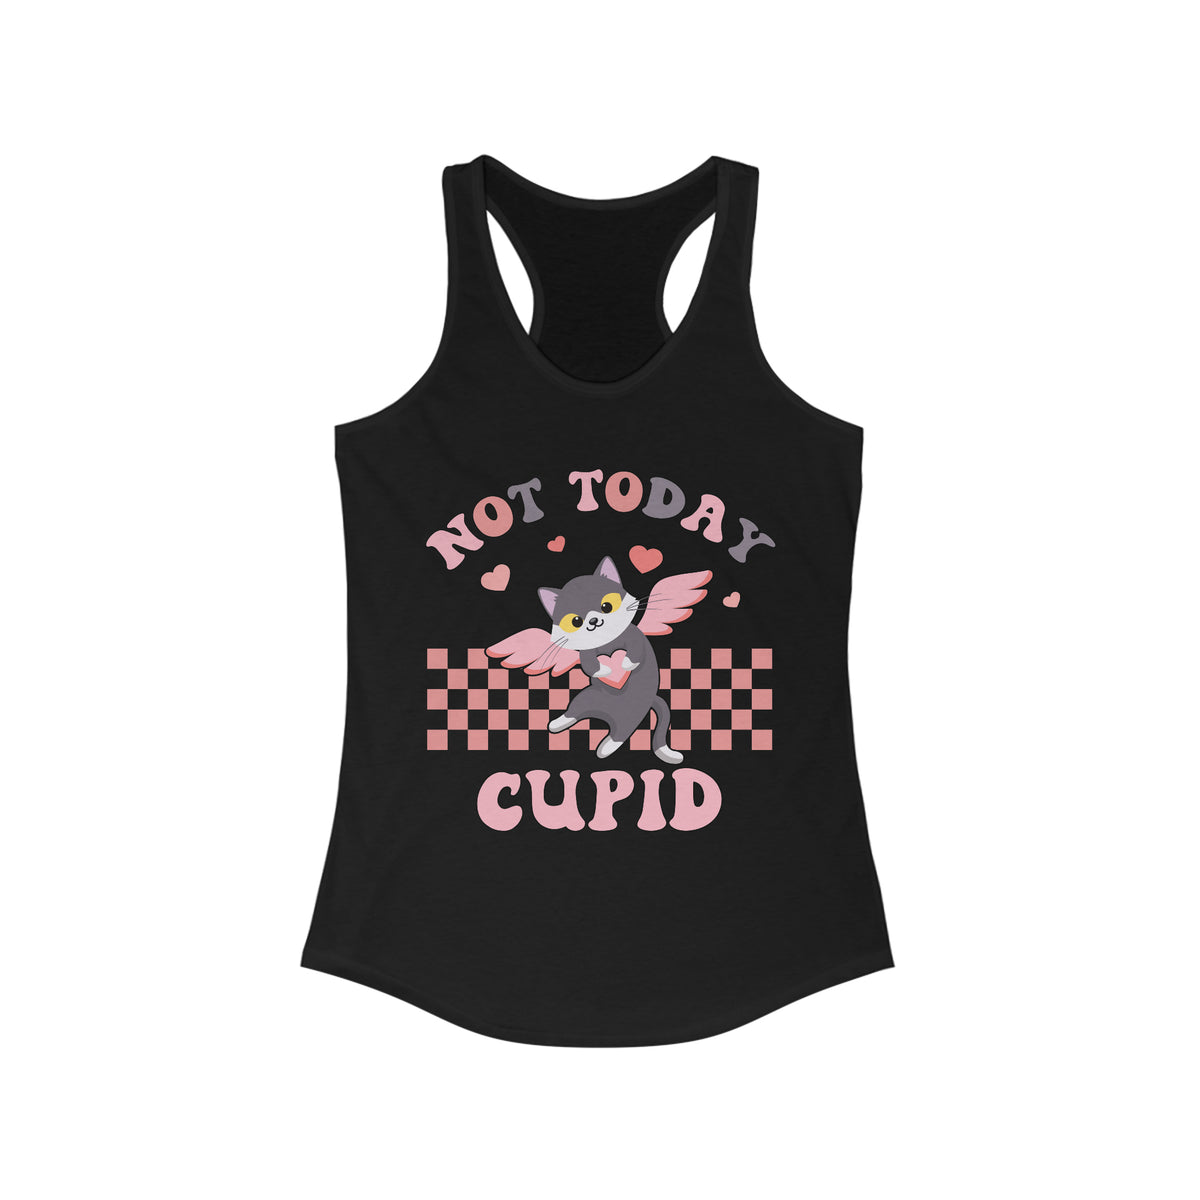 Not Today Cupid  Retro Galentines Day Shirt | Funny Valentines Day Gift | Women's Ideal Racerback Tank